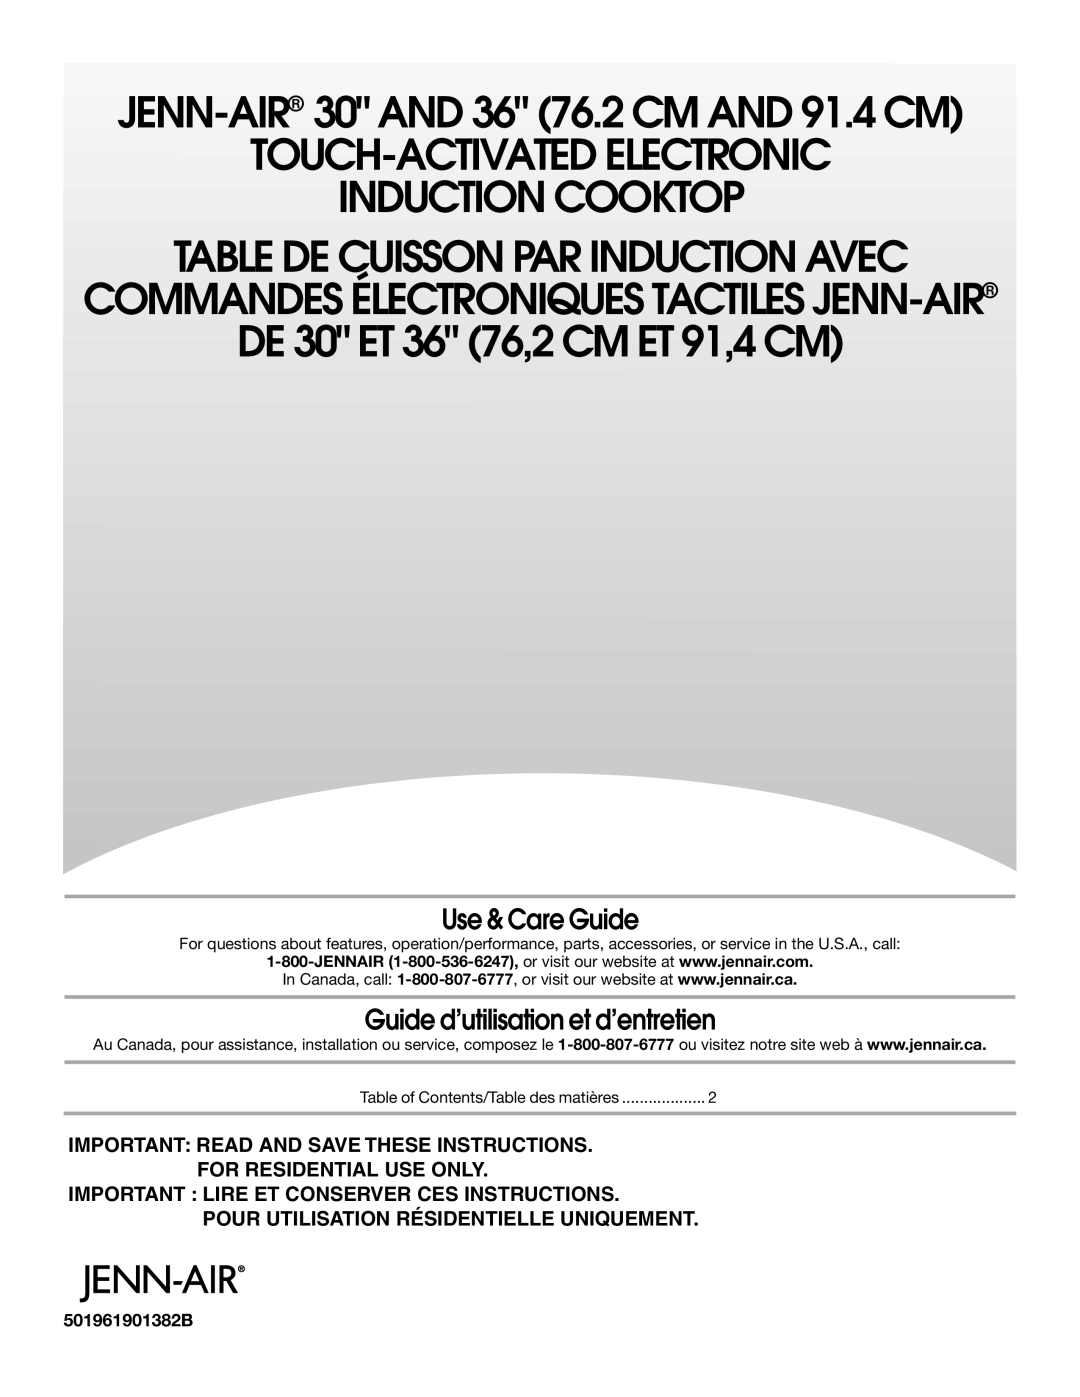 Jenn-Air JIC4430X manual Use & Care Guide, Guide d’utilisation et d’entretien, 501961901382B, For Residential Use Only 